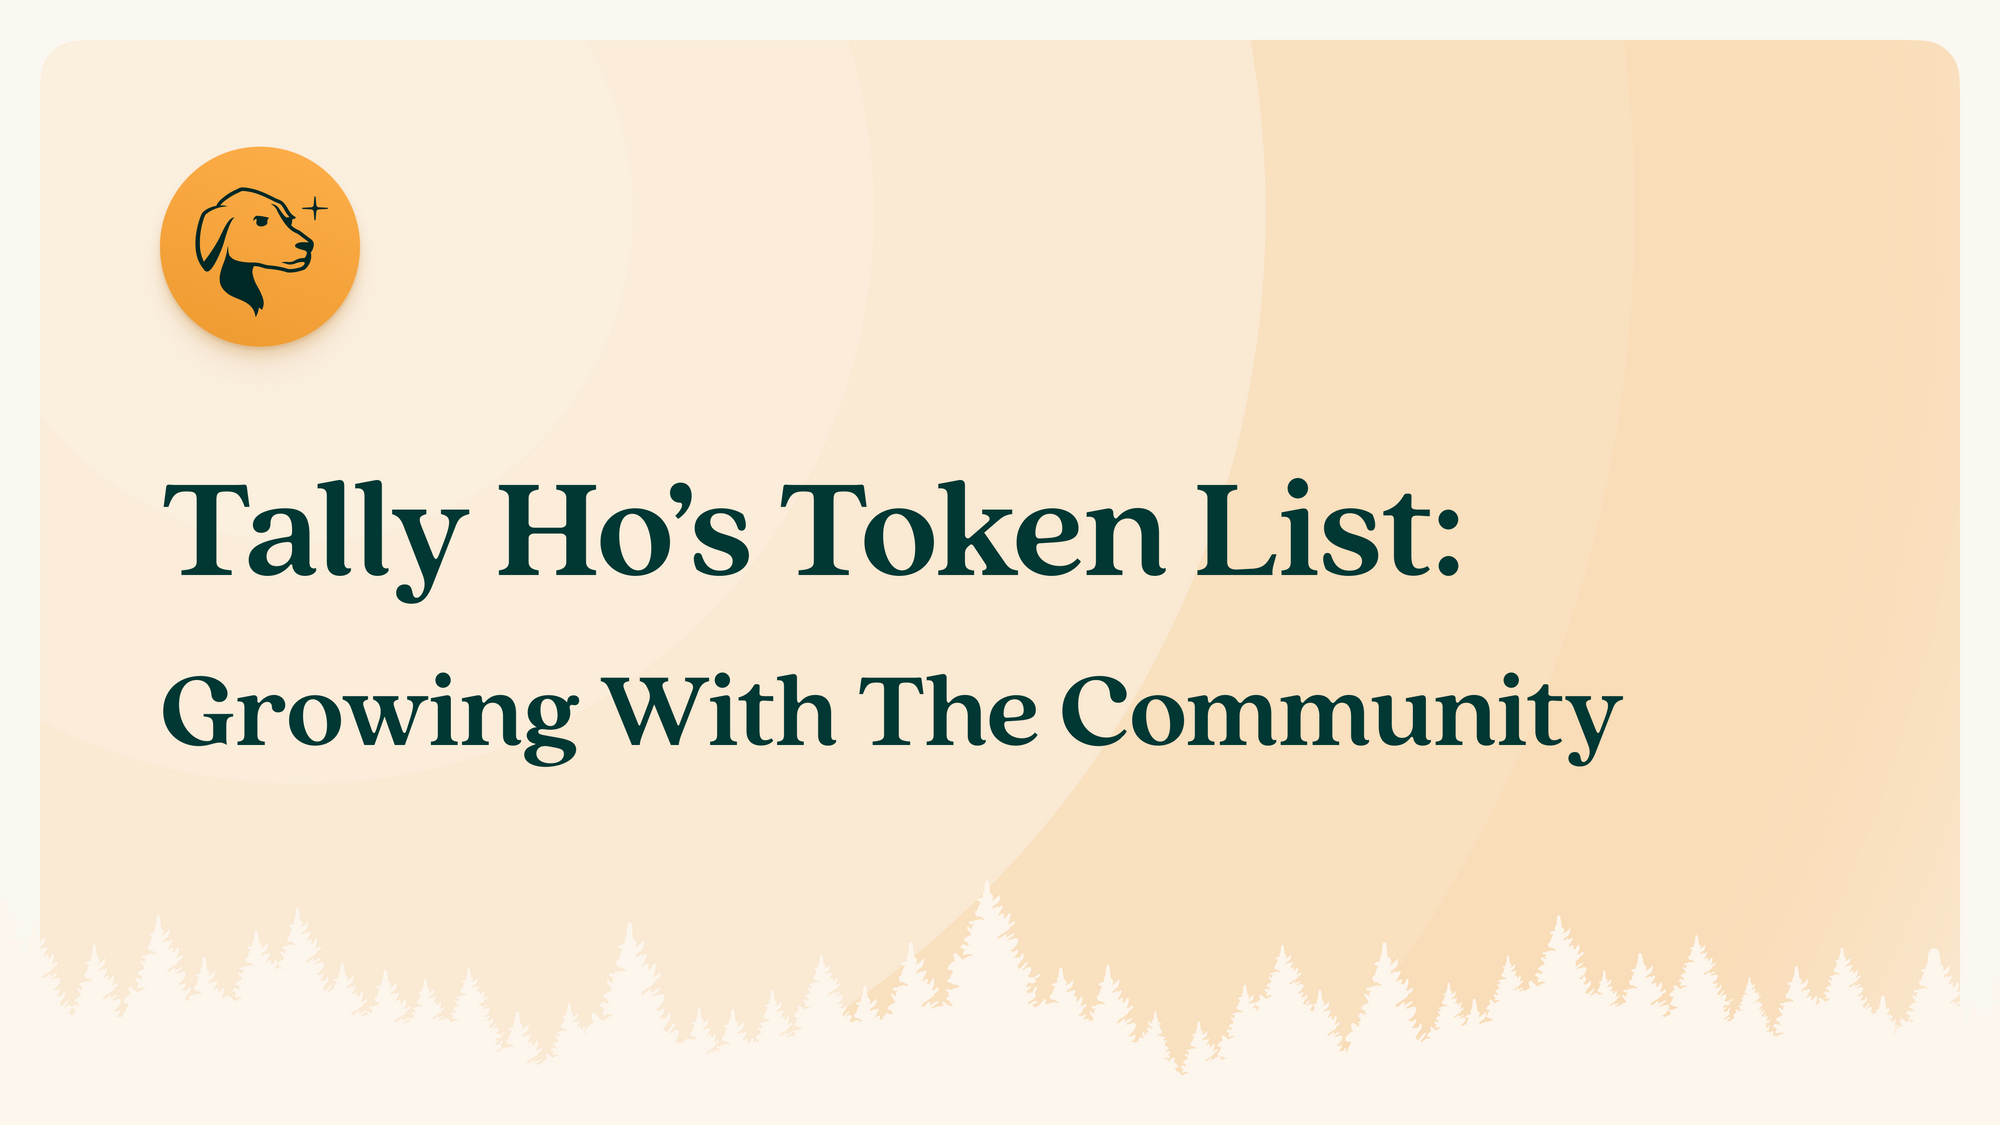 Tally Ho's Token List: Growing With The Community